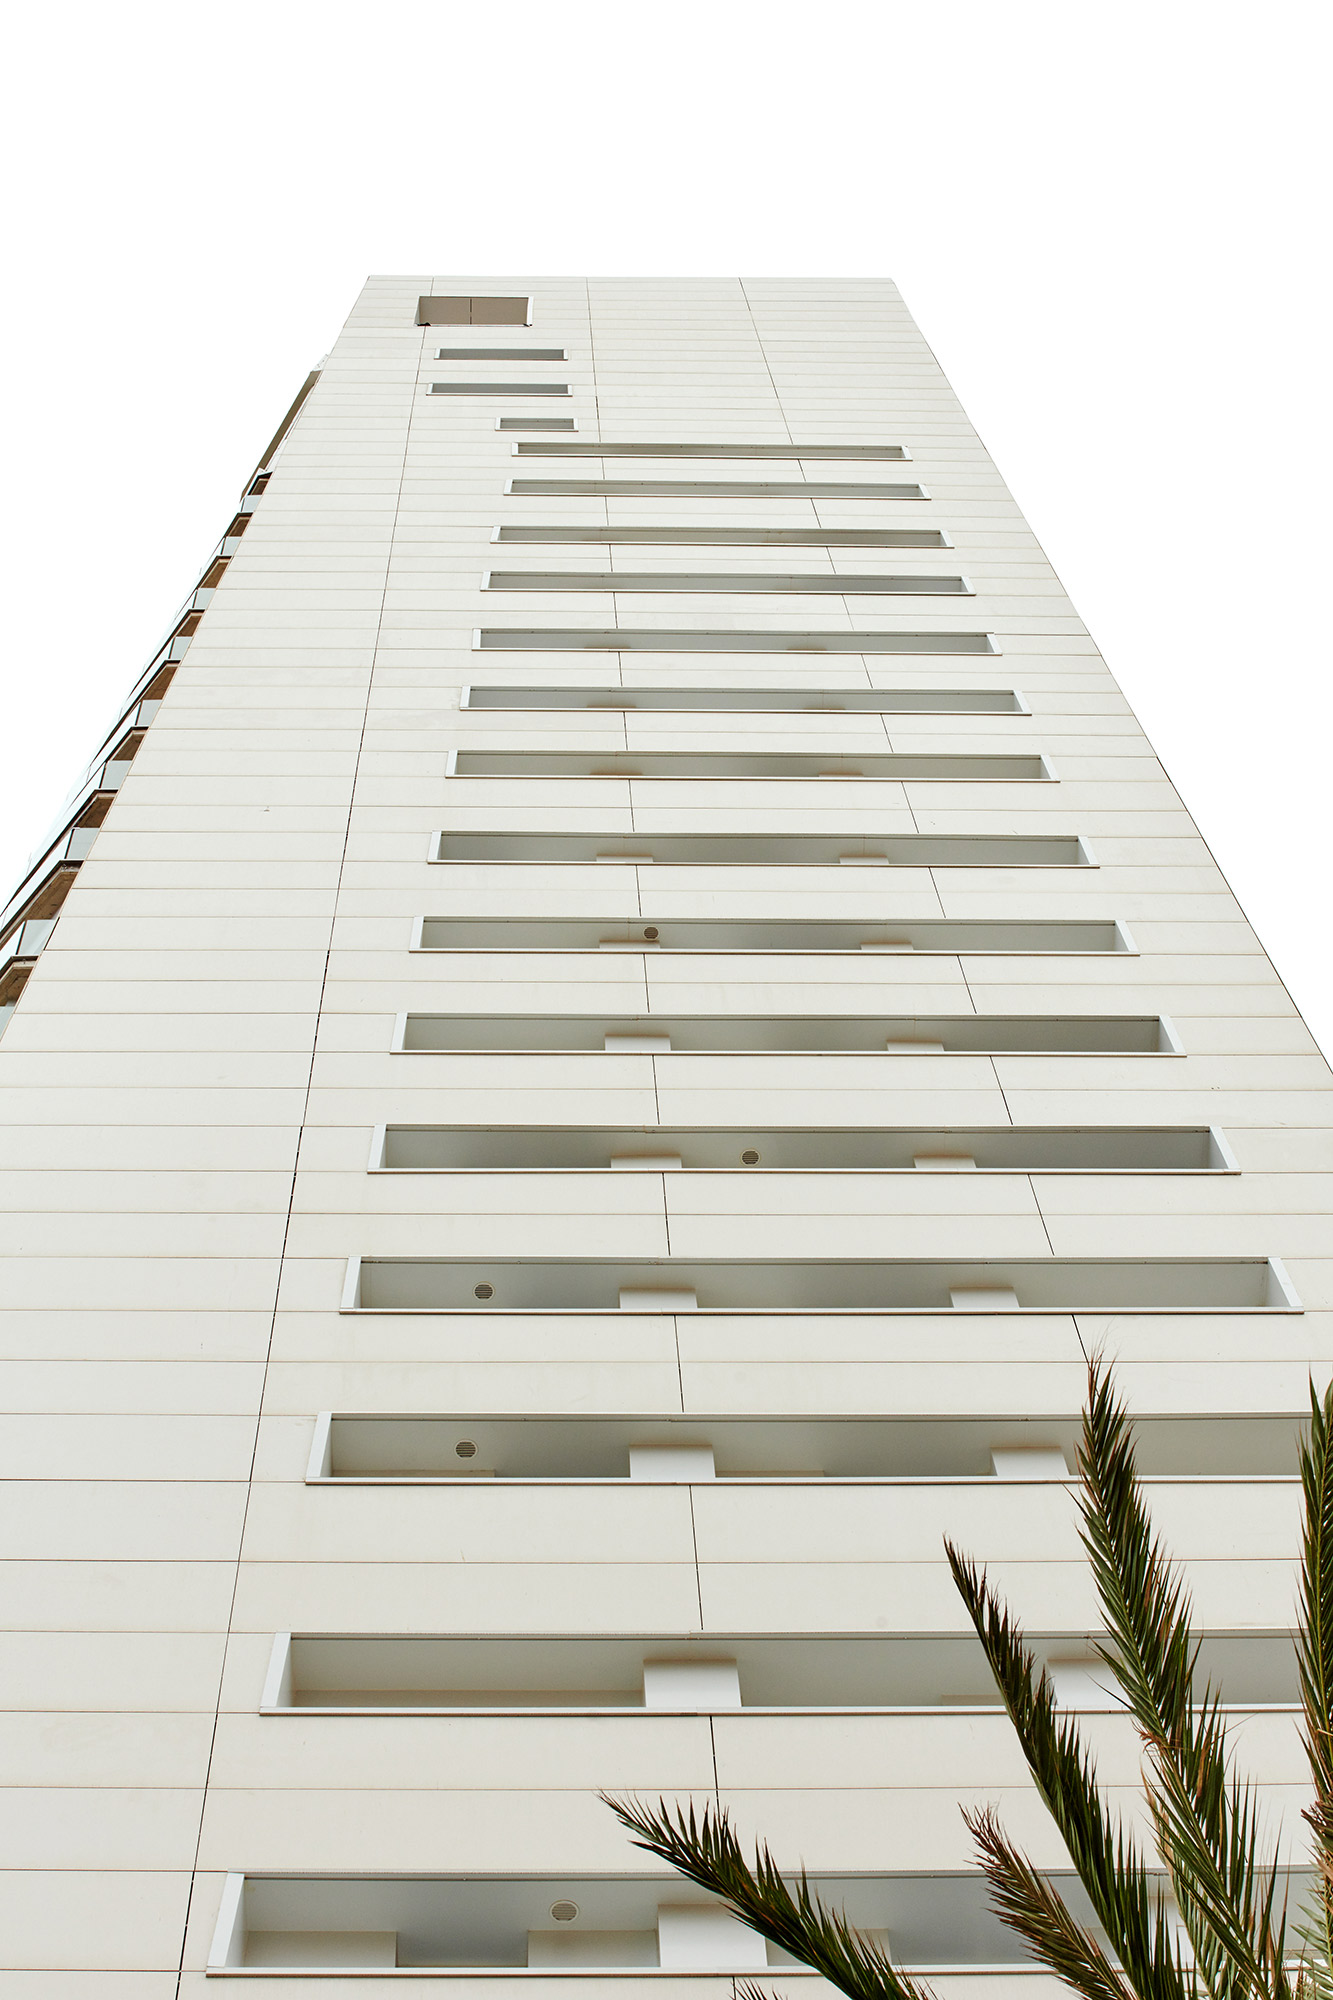 Image of delfin tower benidorm 4 in Dekton presents the world’s first curved and ventilated façade made of ultra-compact stone - Cosentino